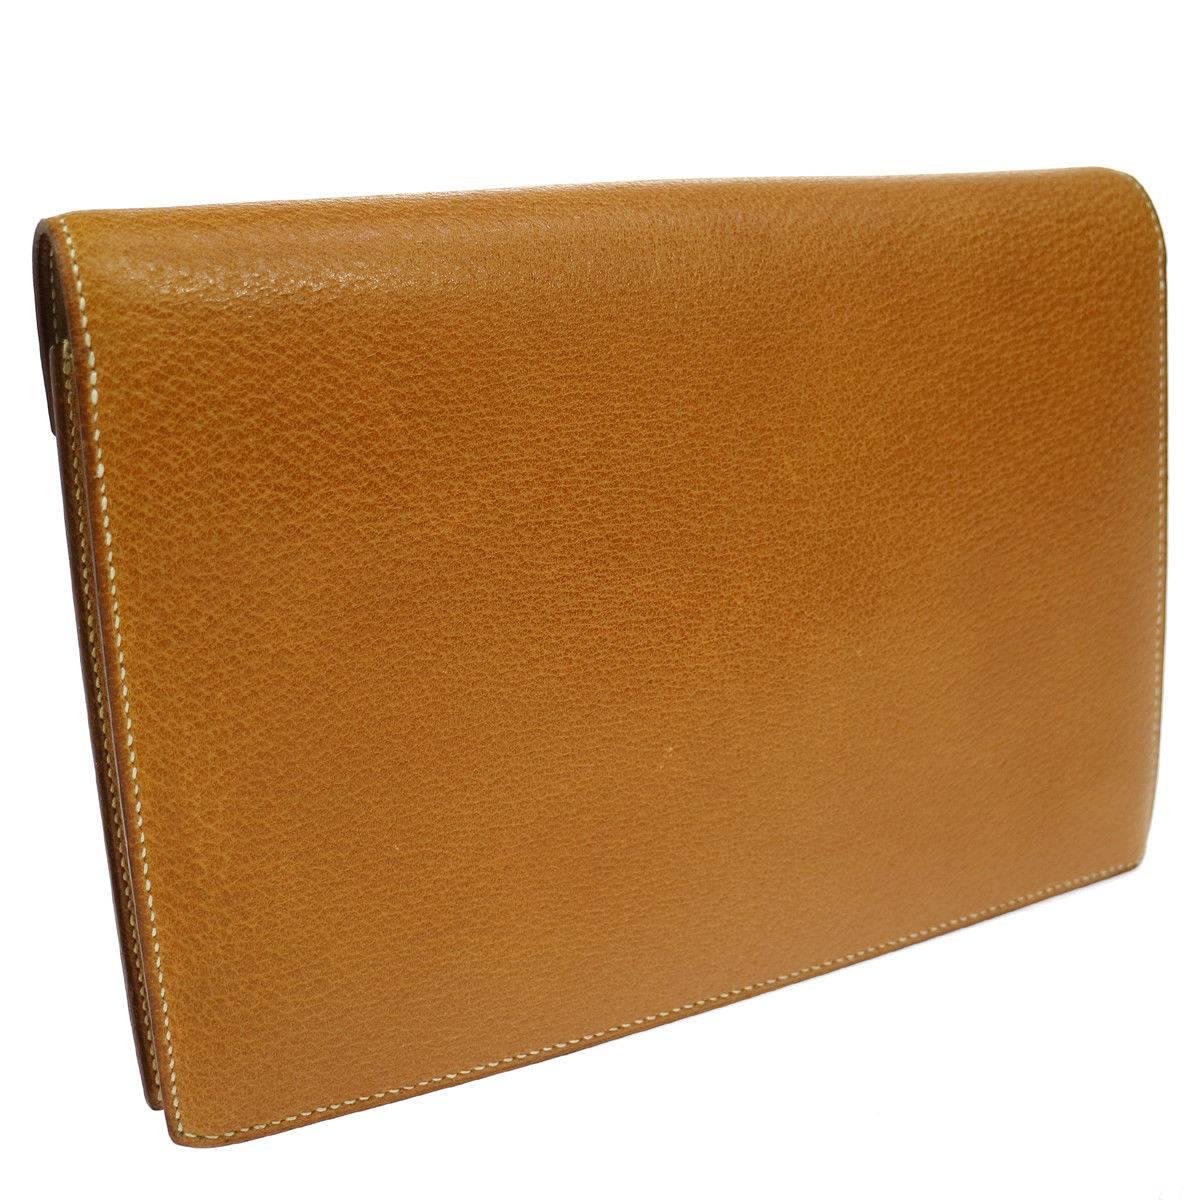 CURATOR'S NOTES

Hermes Cognac Colorblock Leather Envelope Evening Clutch Bag

Leather
Gold tone hardware
Leather lining
Made in France
Date code Circle X
Measures 9" W x 6.25" H x 2" D
Includes original Hermes dust bag